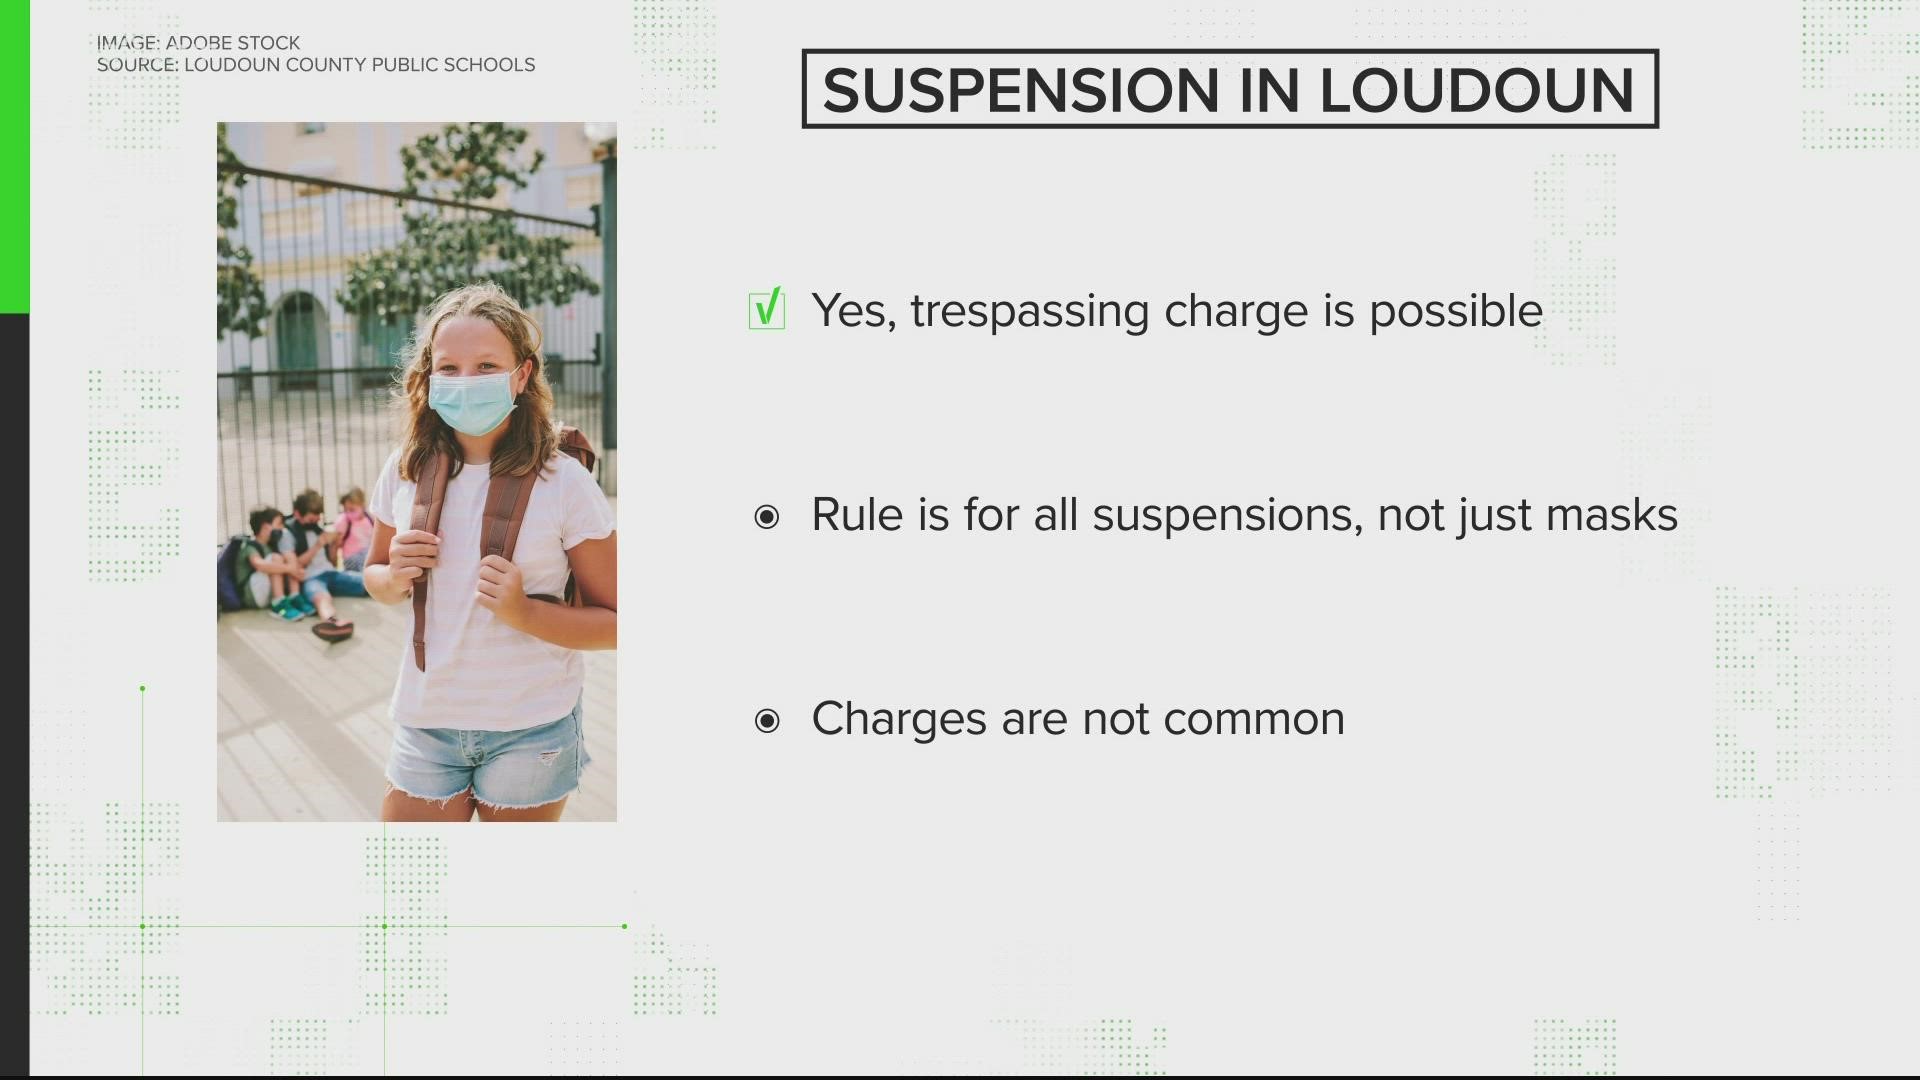 Students who do not wear masks may be suspended for up to 10 days and if they come to campus while suspended, they could be charged with trespassing.